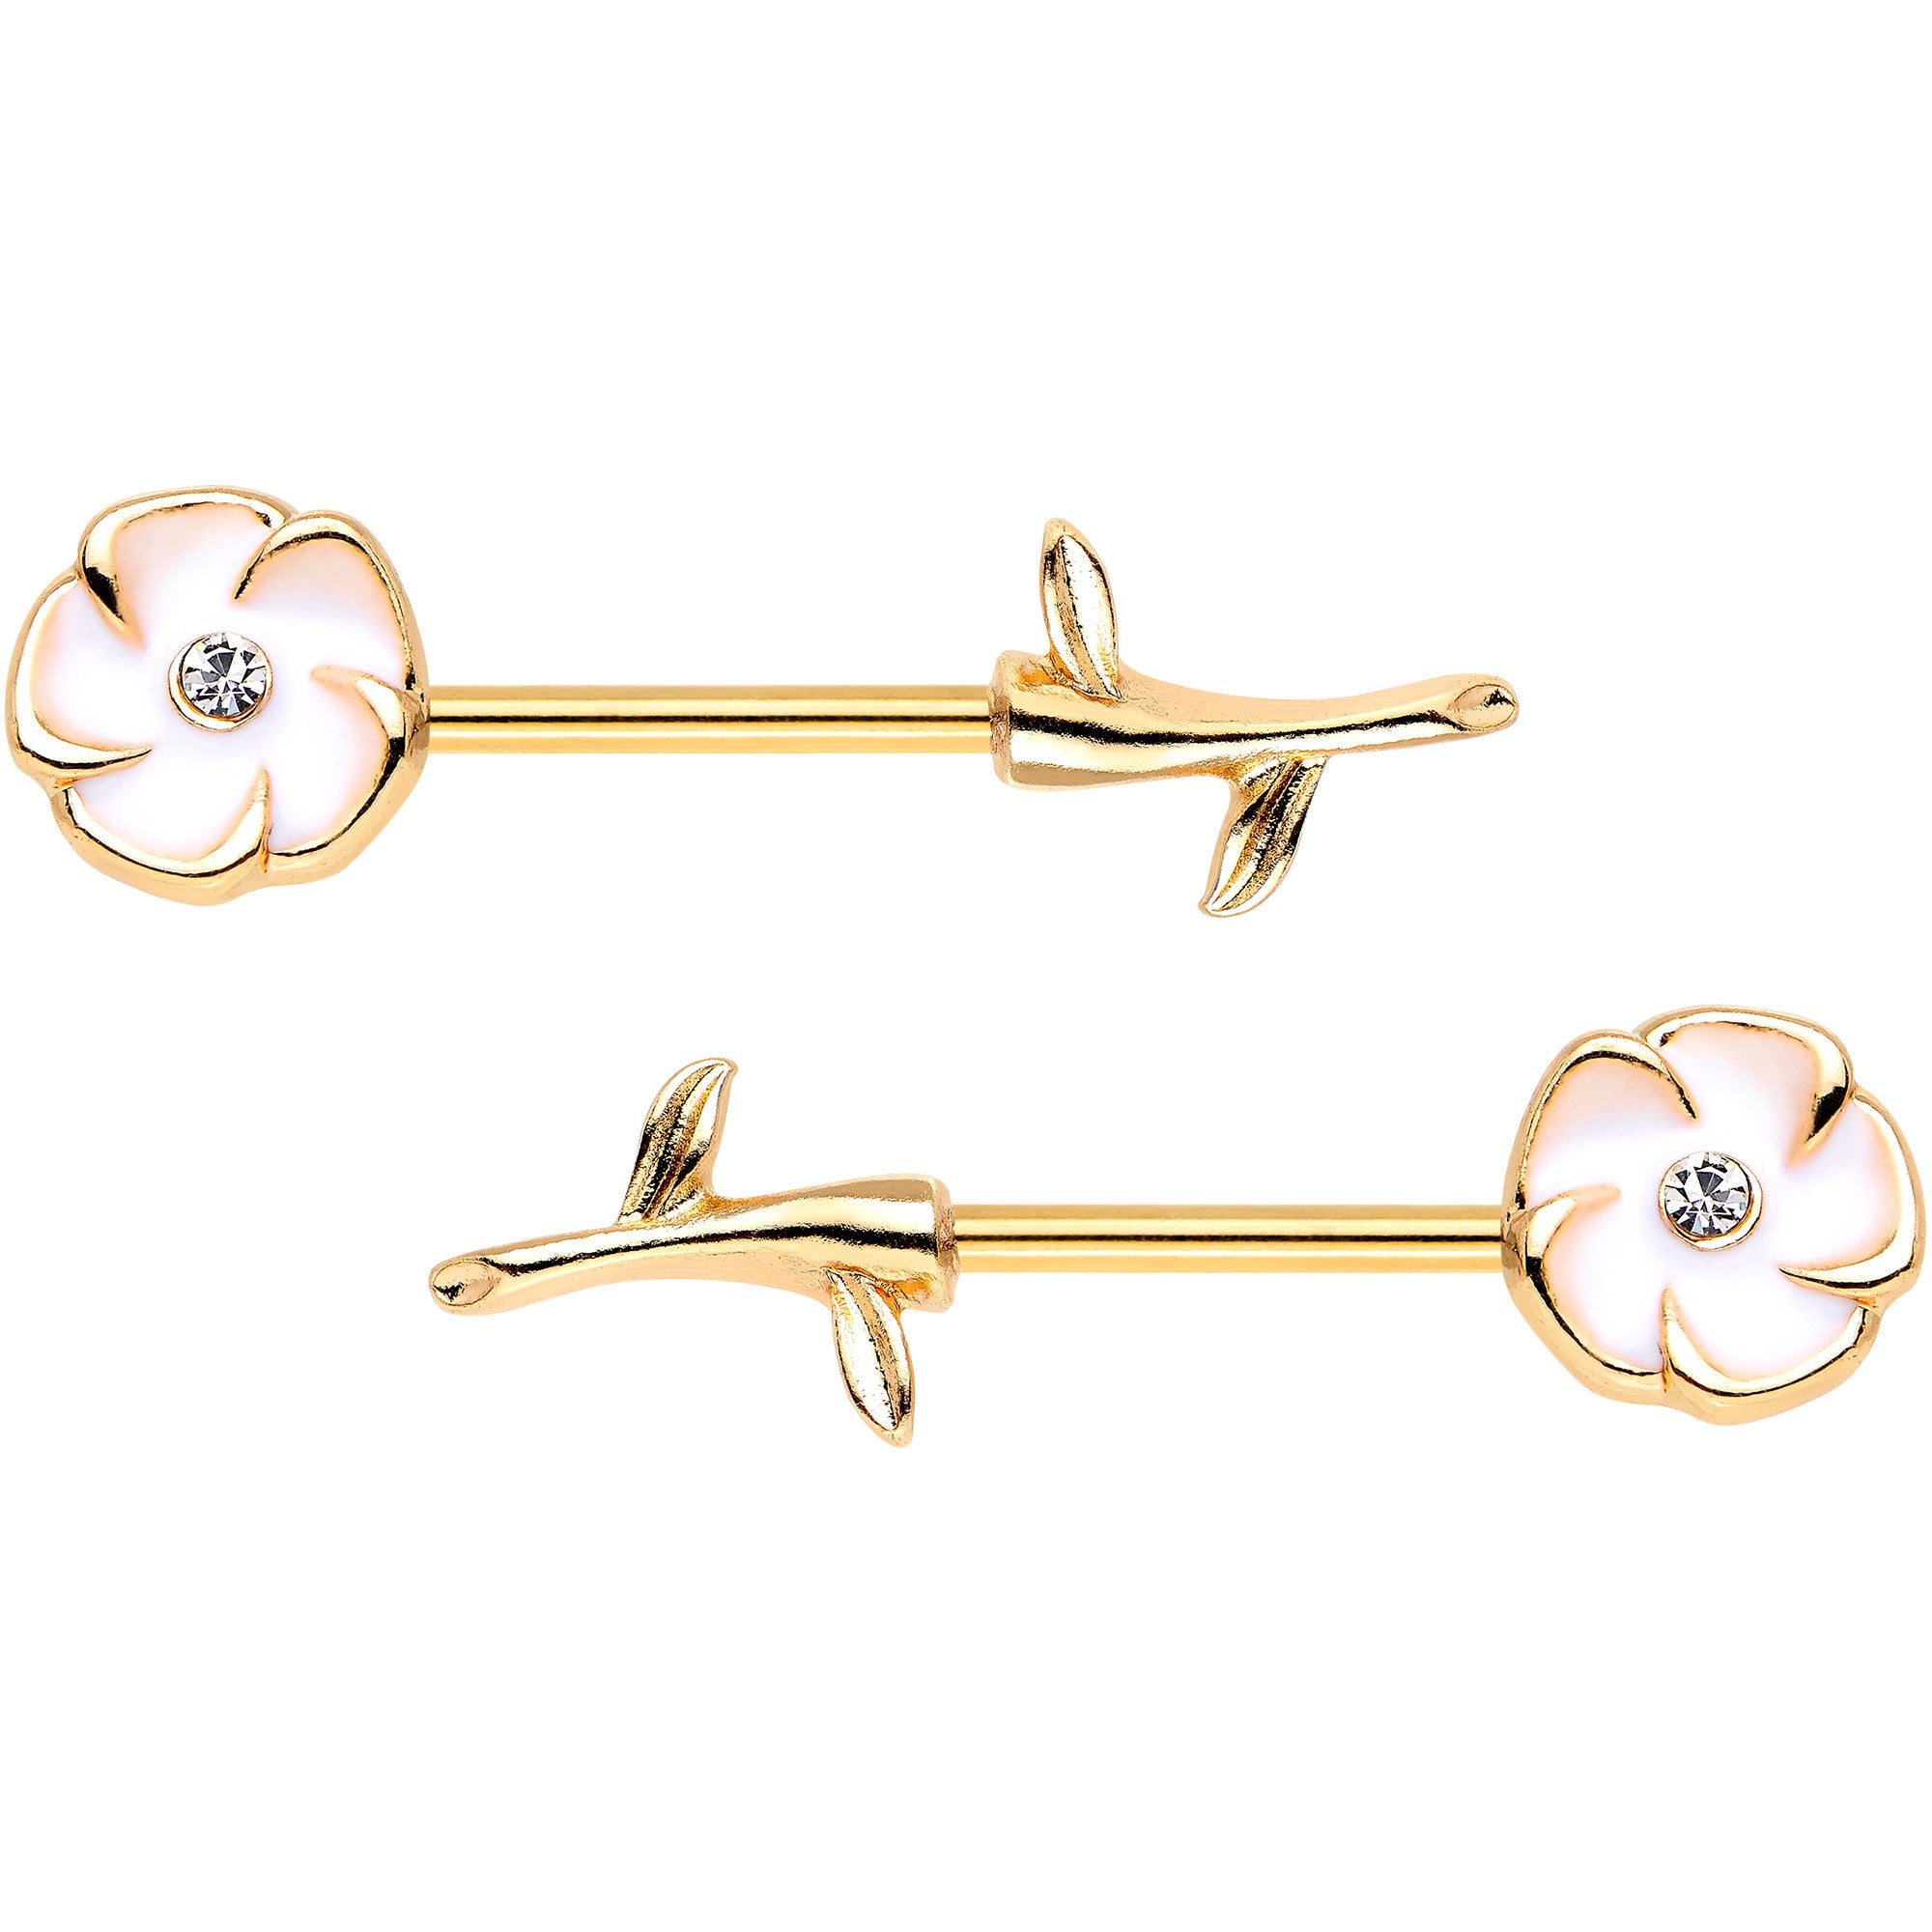 5/8 Clear Gem Gold PVD White Buttercup Flower Barbell Nipple Ring Set